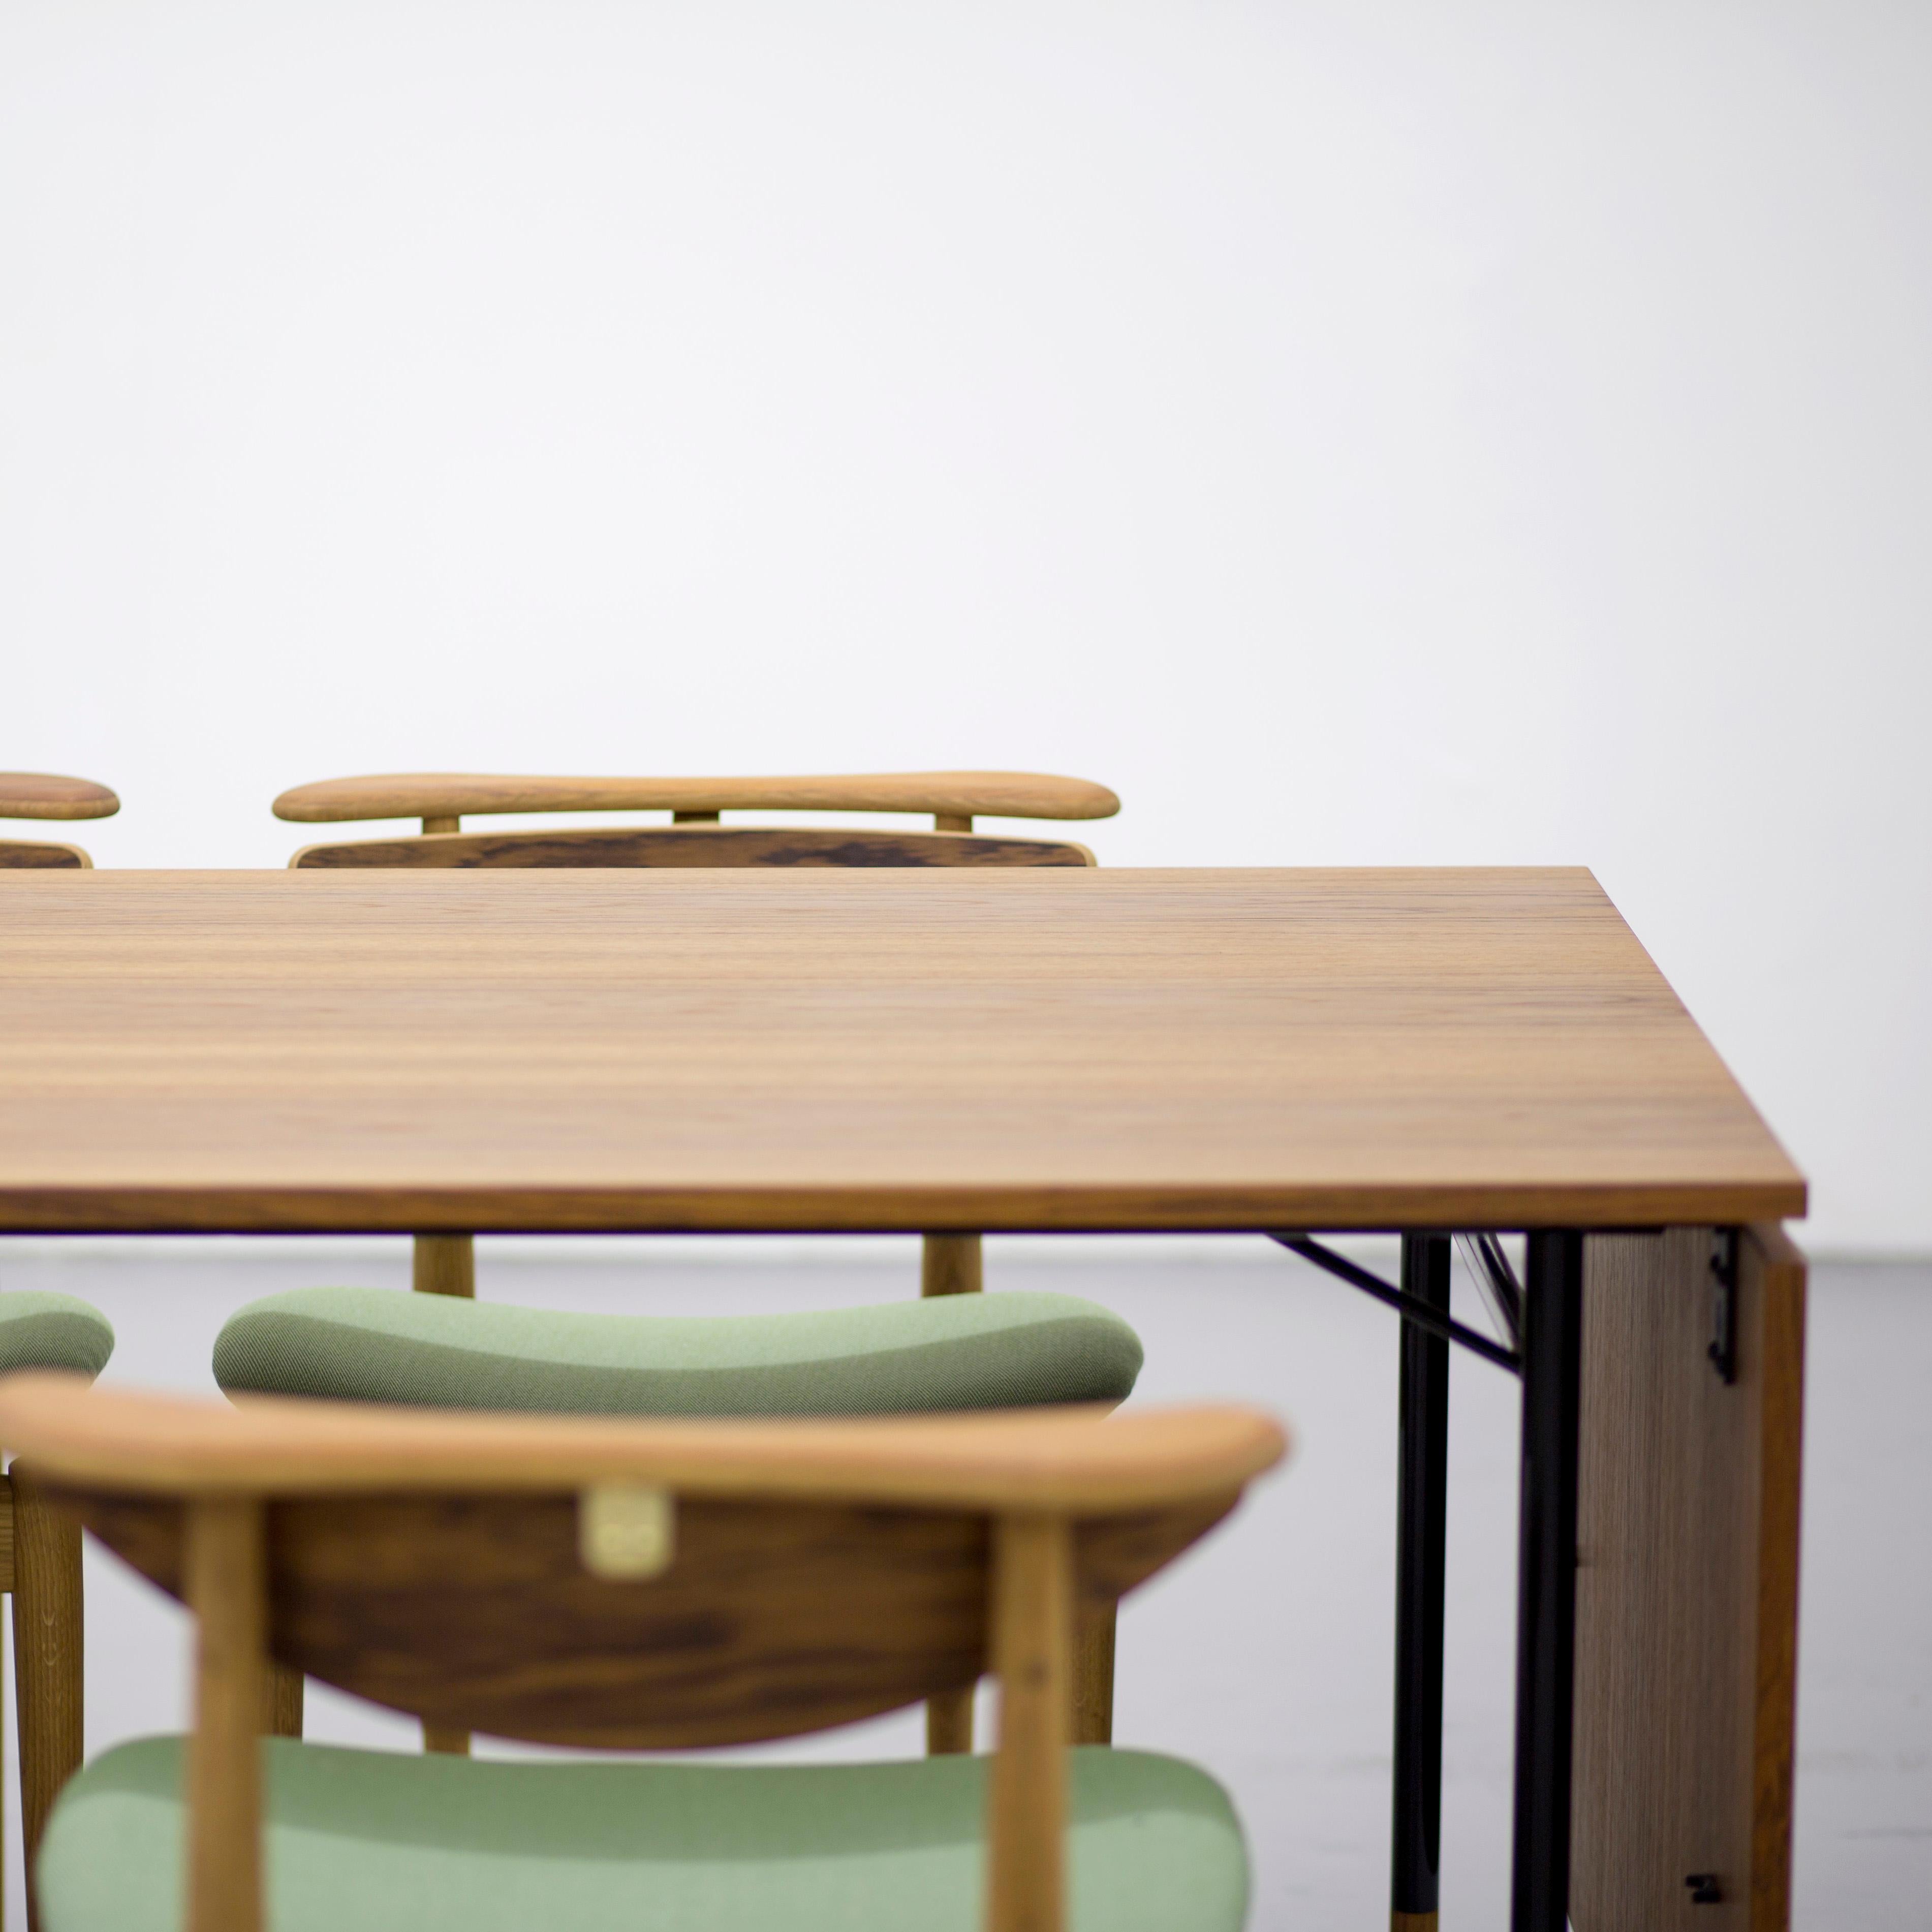 Finn Juhl Nyhavn Dining Table with Two Drop Leaves, Lino and Wood 9